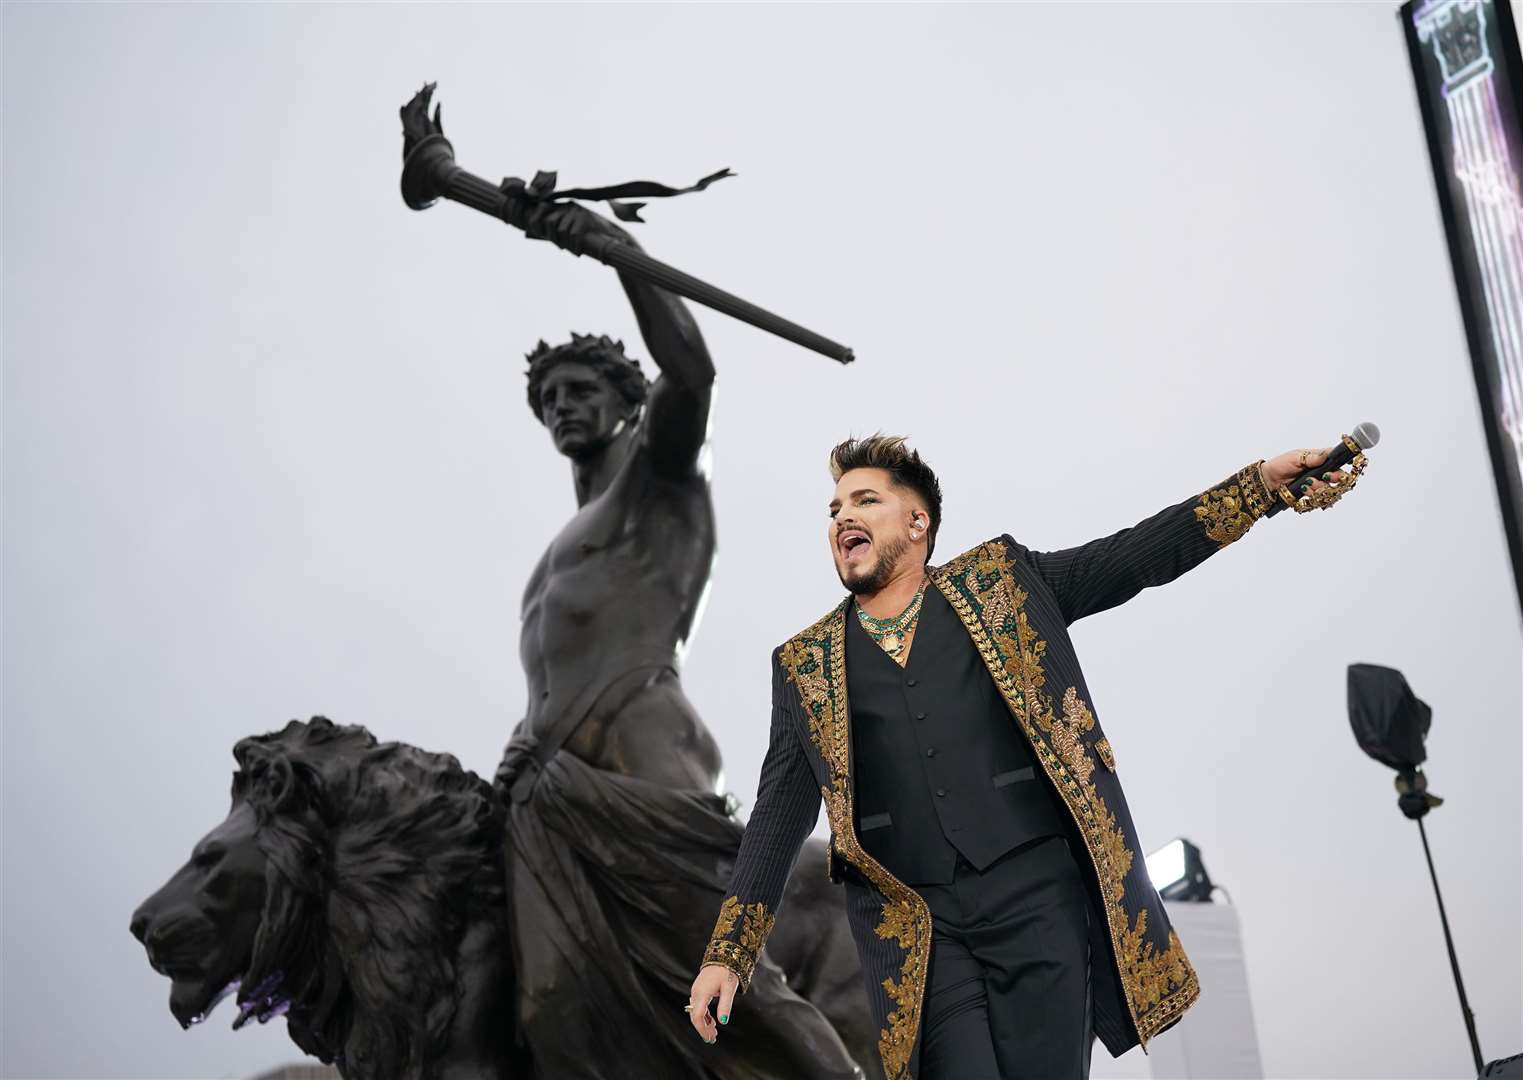 Adam Lambert performs during the Platinum Party at the Palace staged in front of Buckingham Palace (Yui Mok/PA)